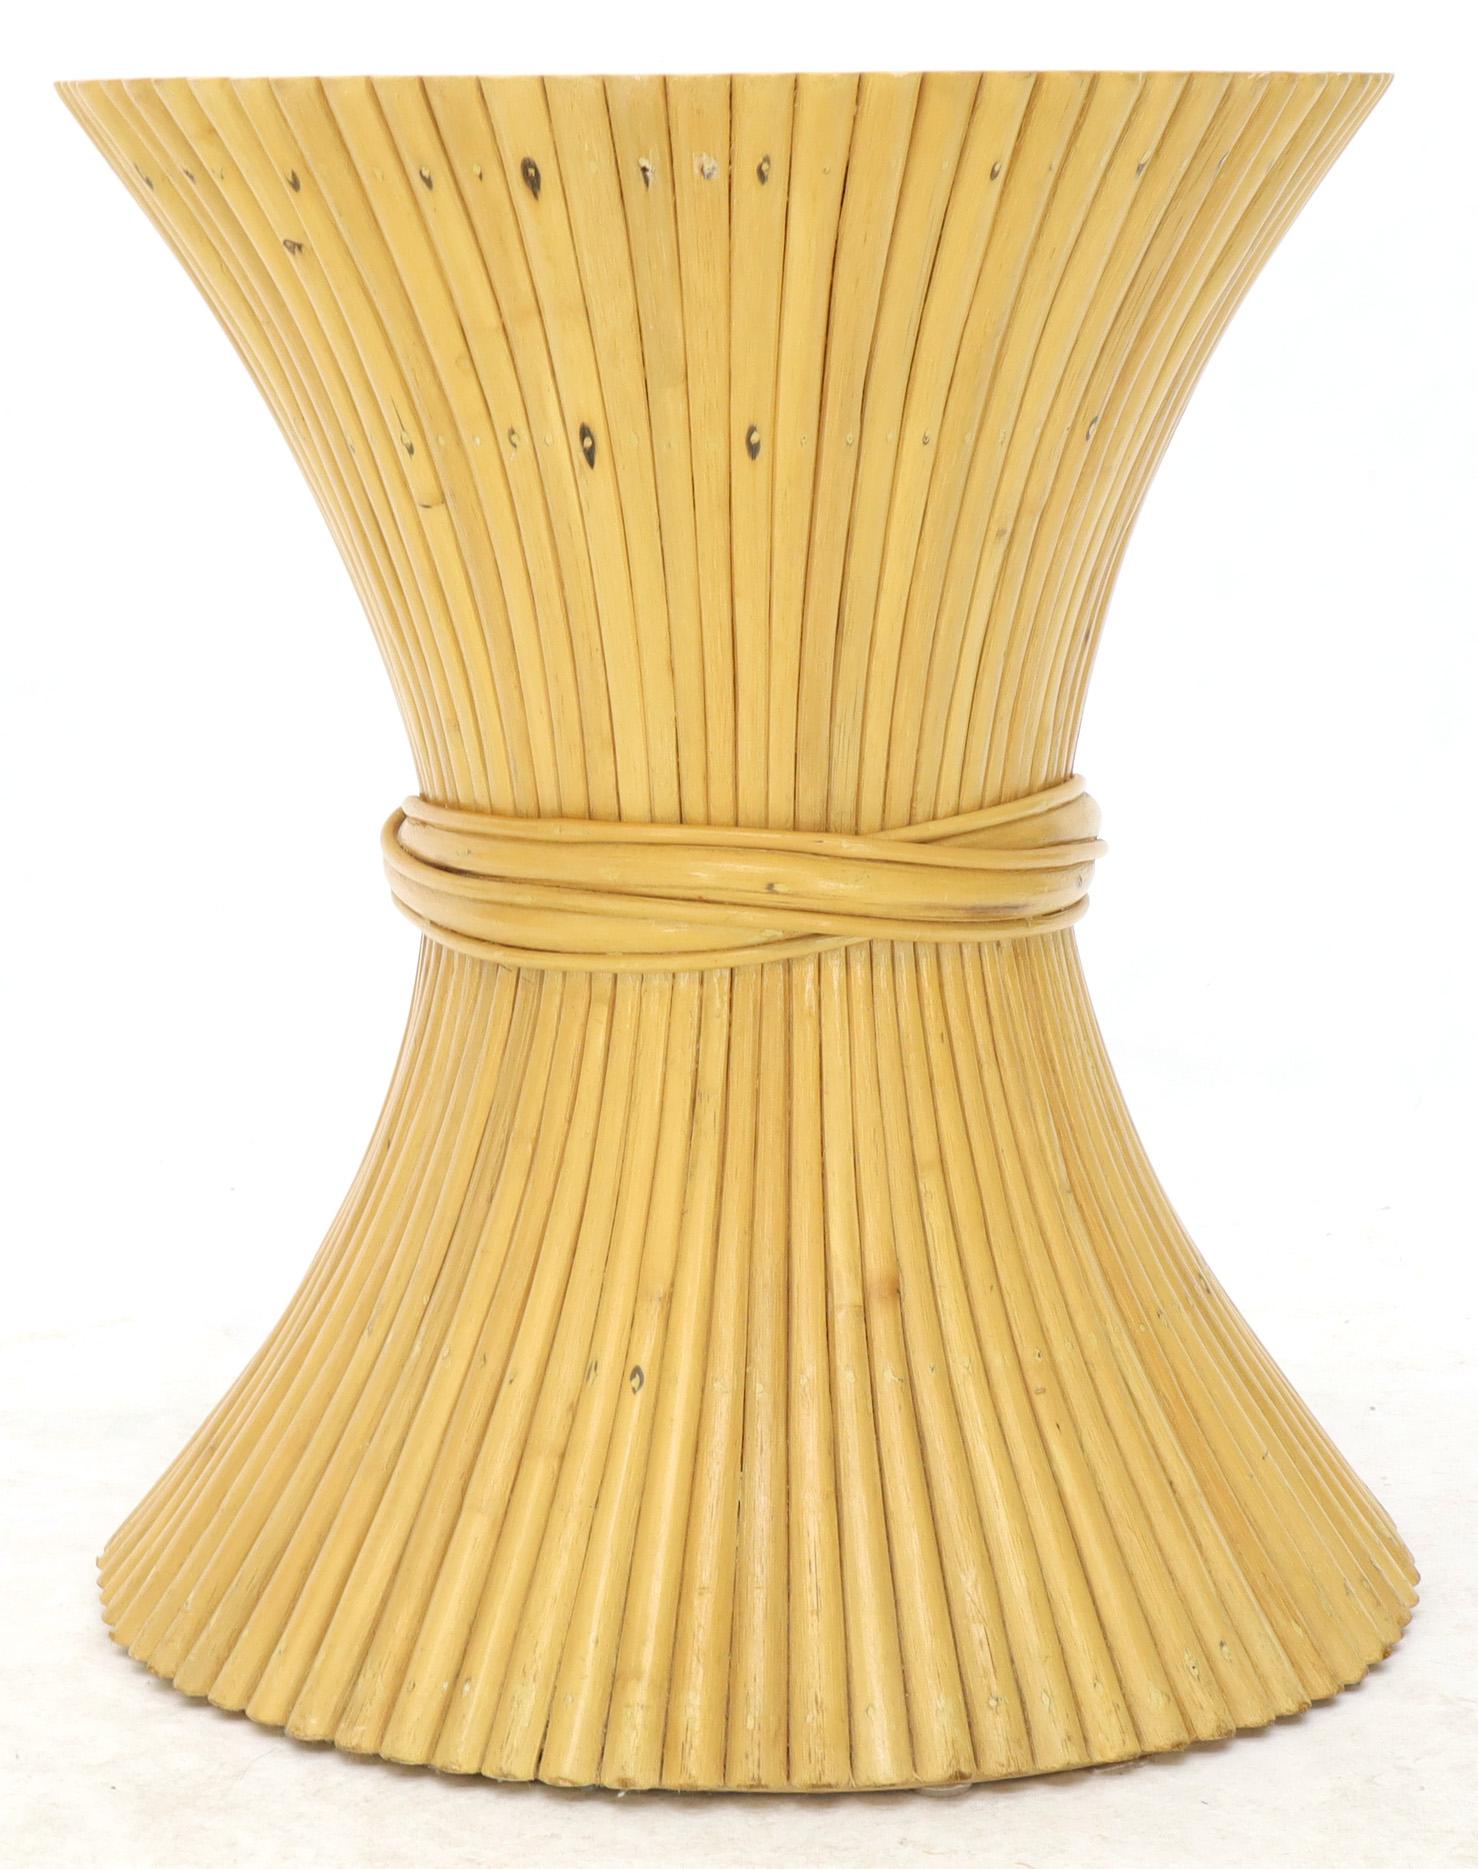 Sheaf of Bamboo Wheat Round Dining Table Base McGuire 1